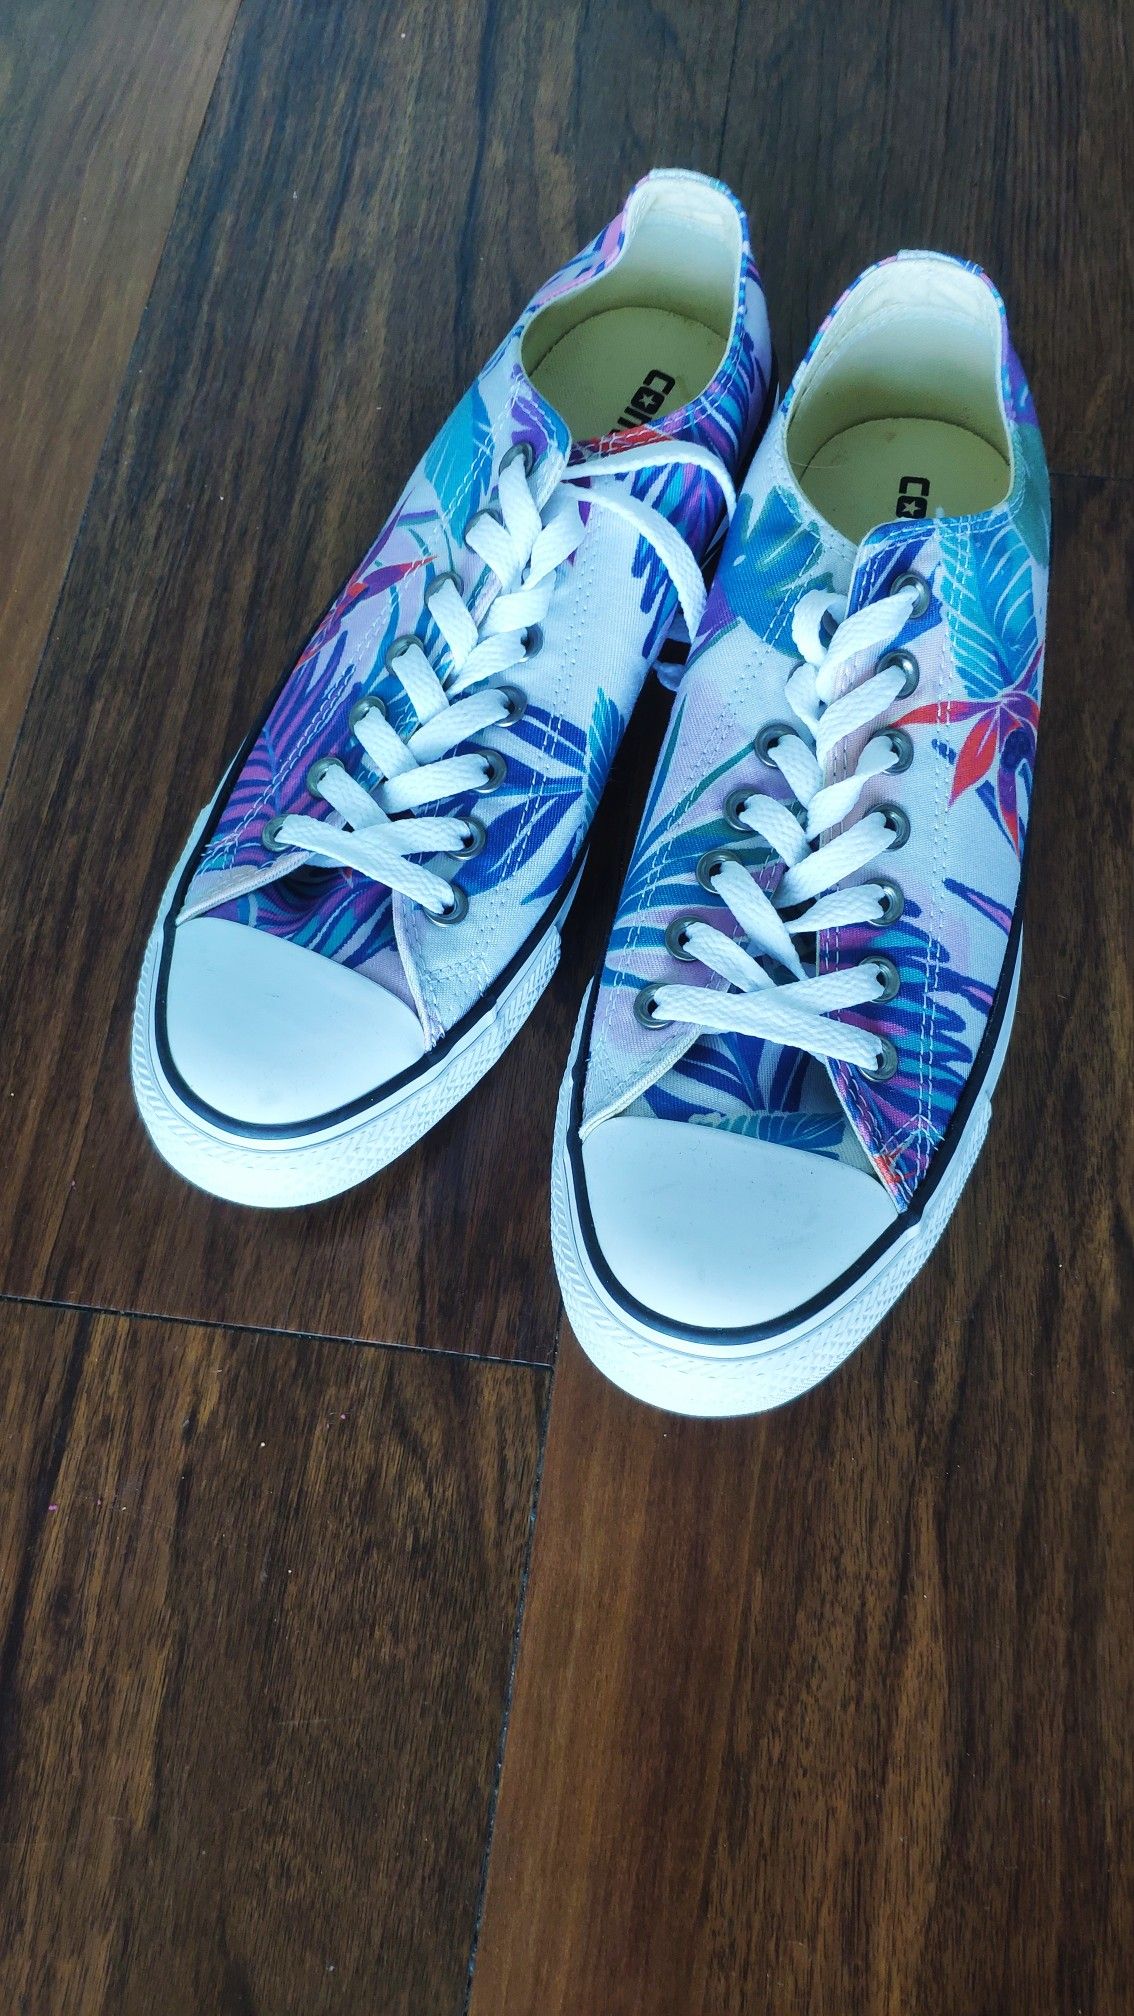 New Converse All-Star shoes Tropic color women's 10.5